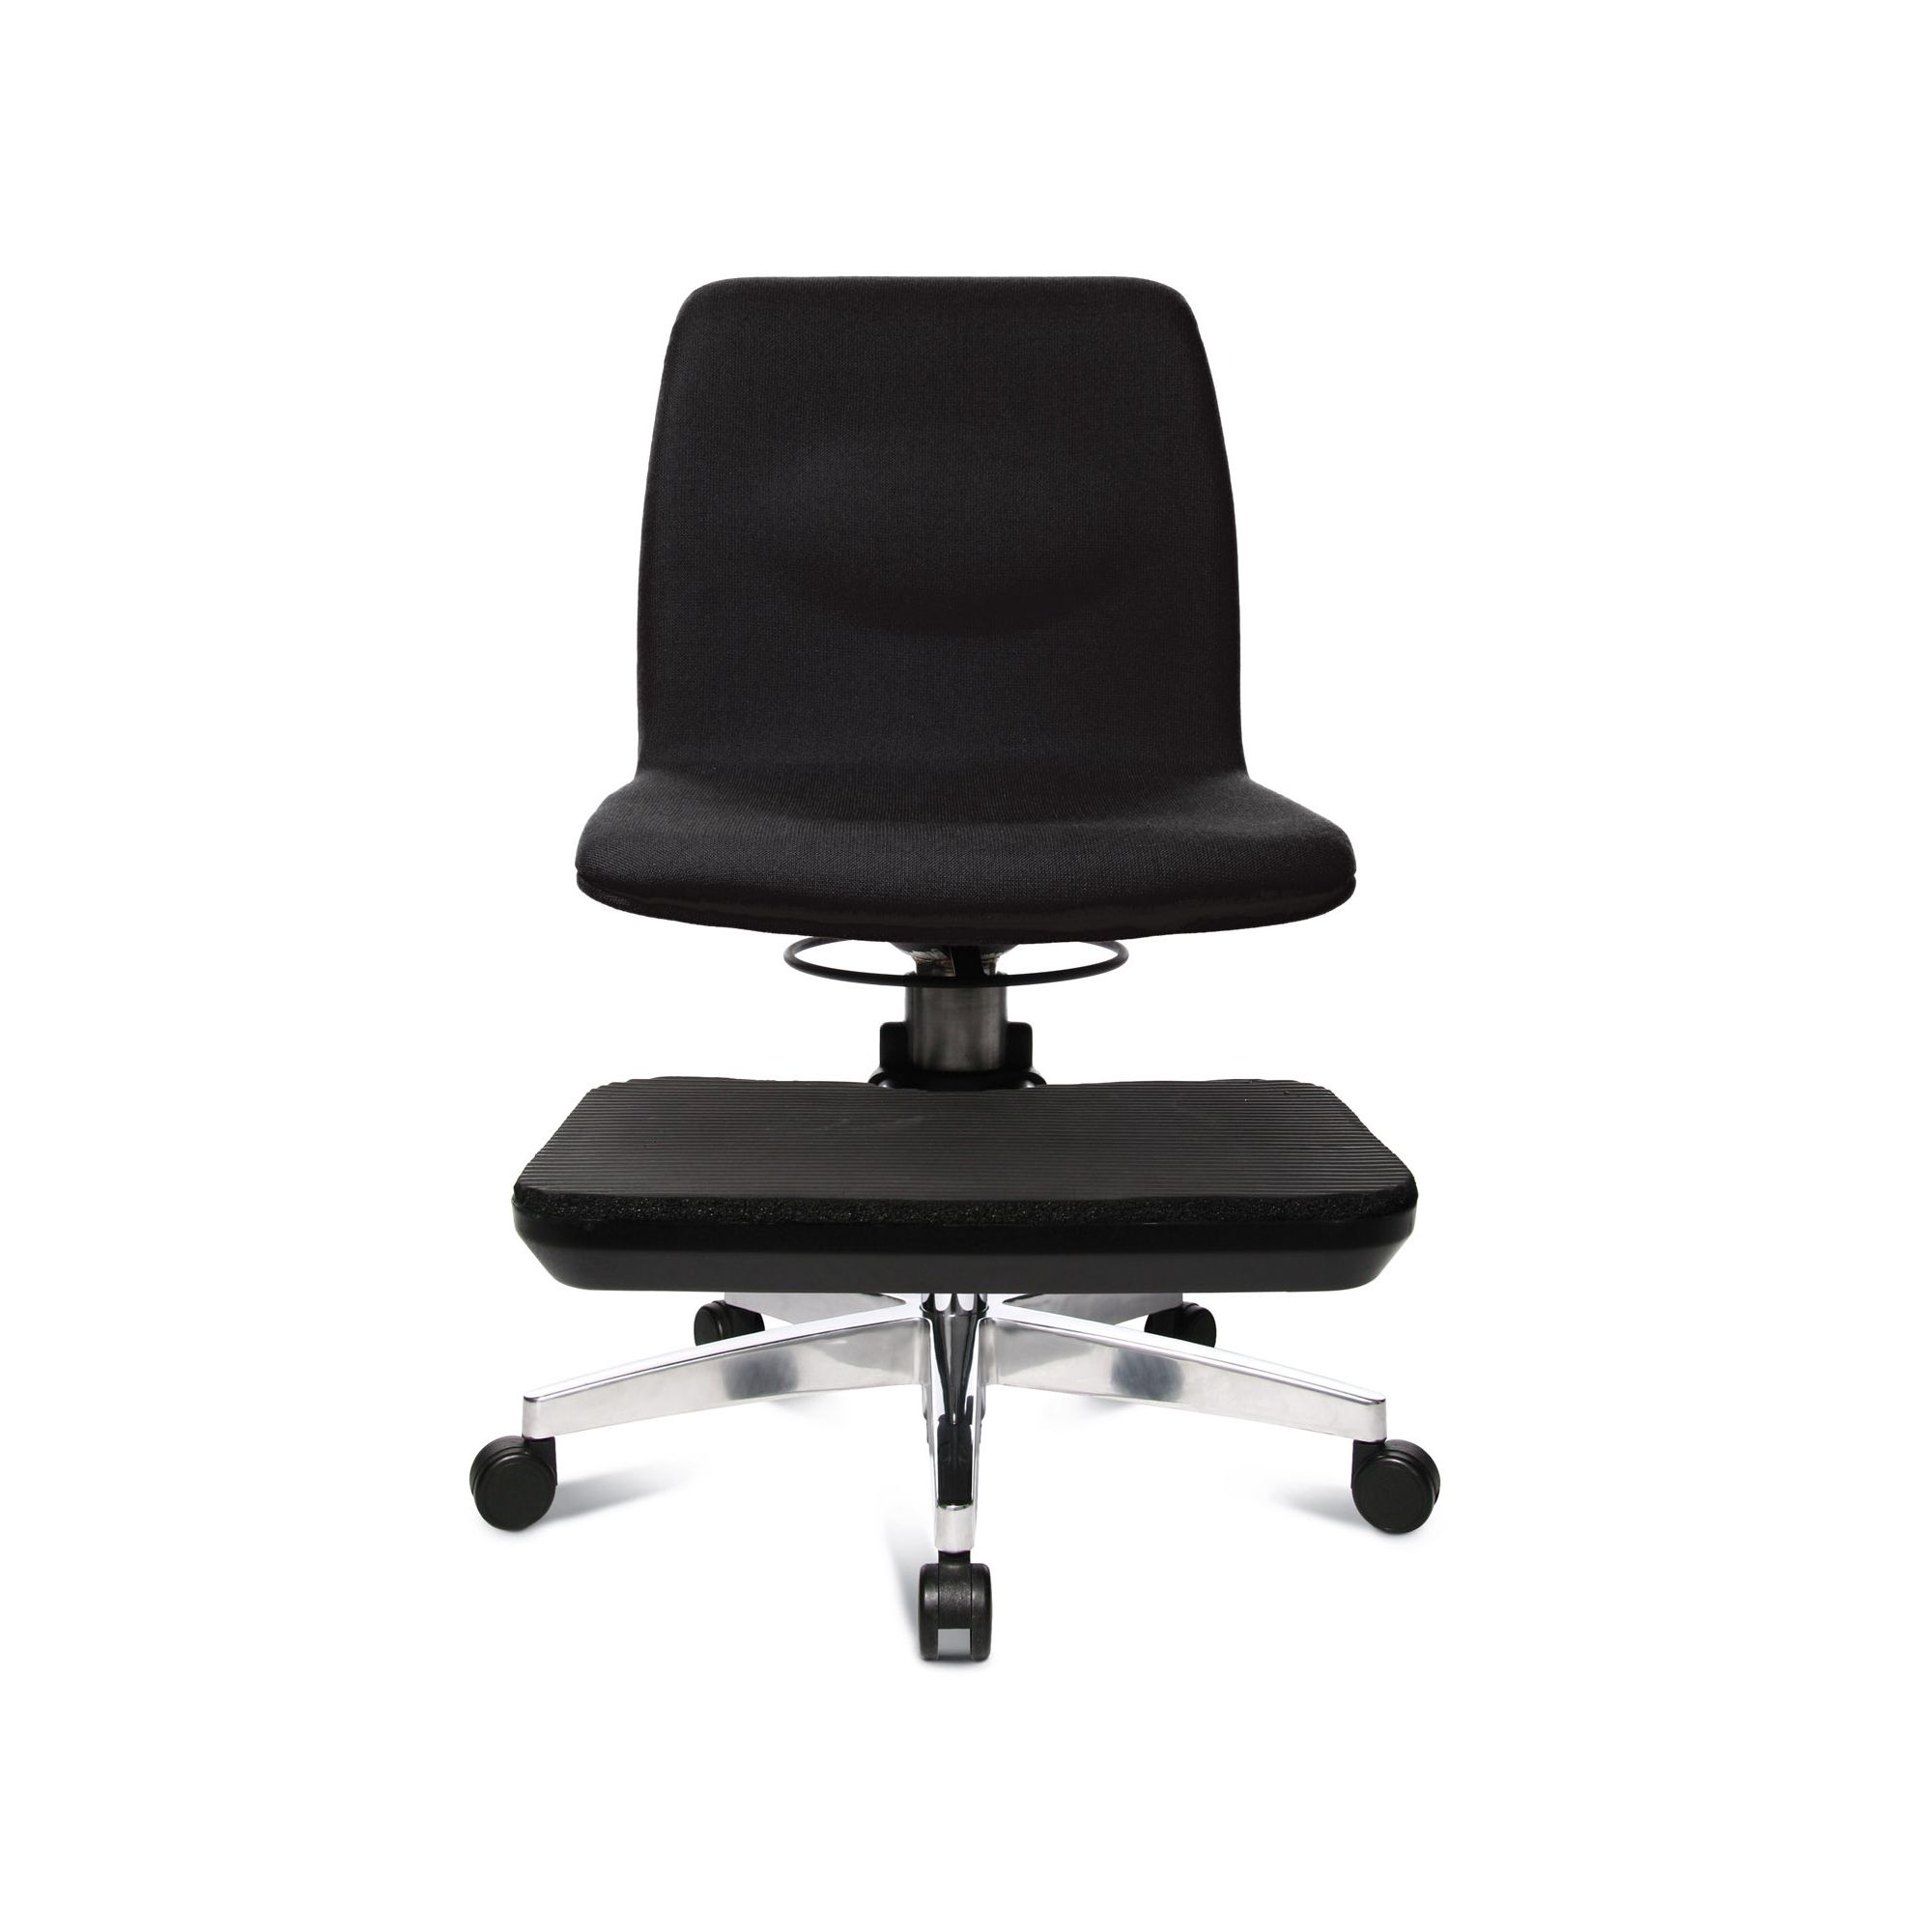 Topstar Sitness 200 Swivel Chair in Black at Tescos Direct